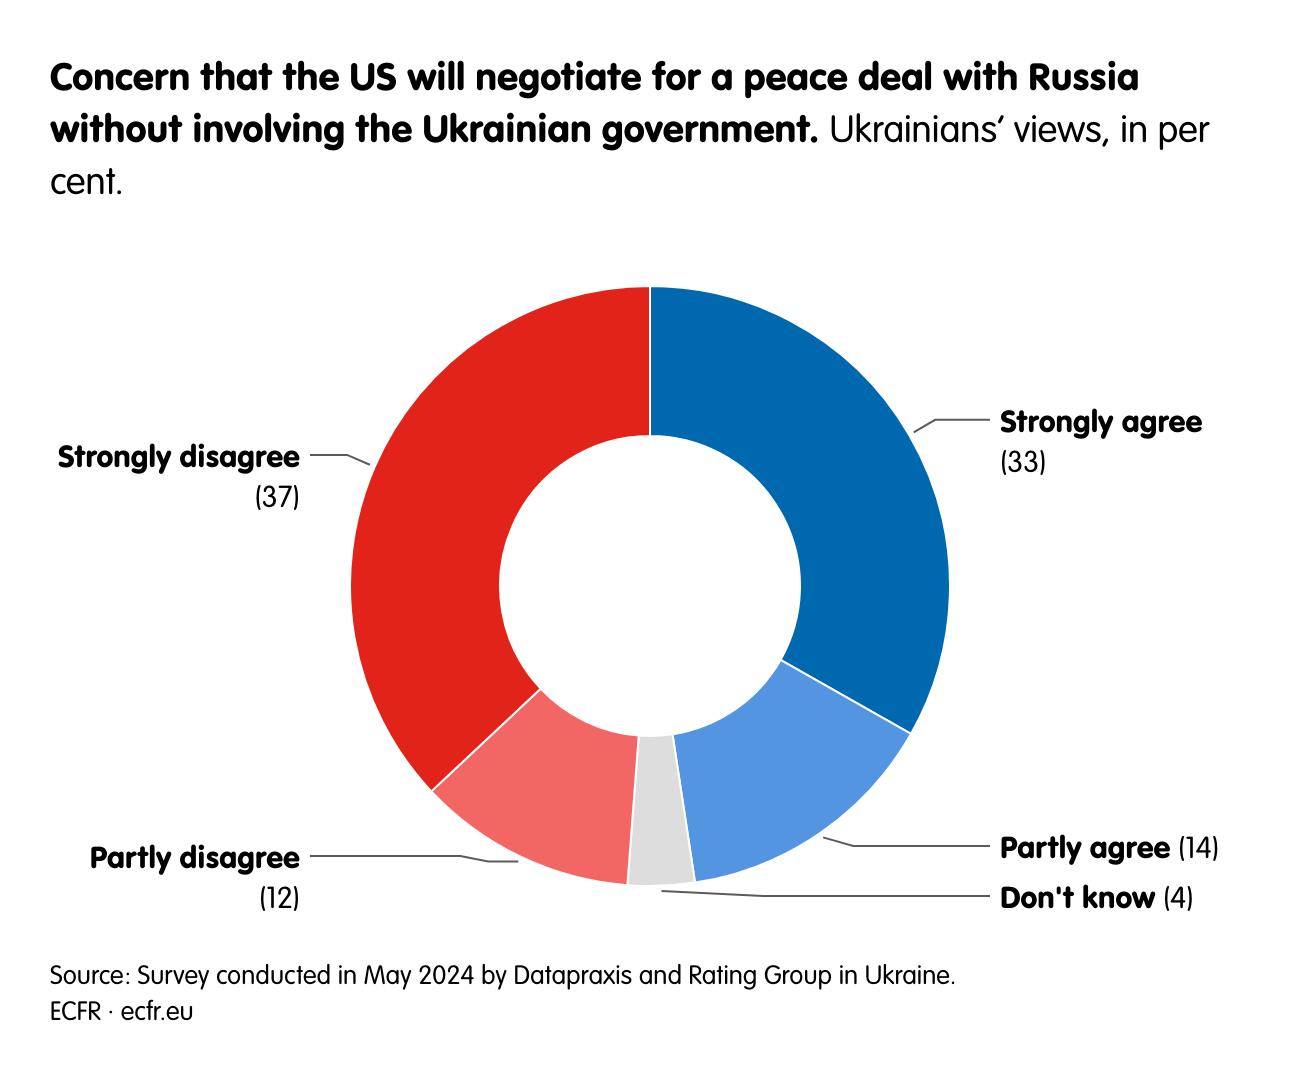 I am concerned that the US will negotiate for a peace deal with Russia without involving the Ukrainian government.